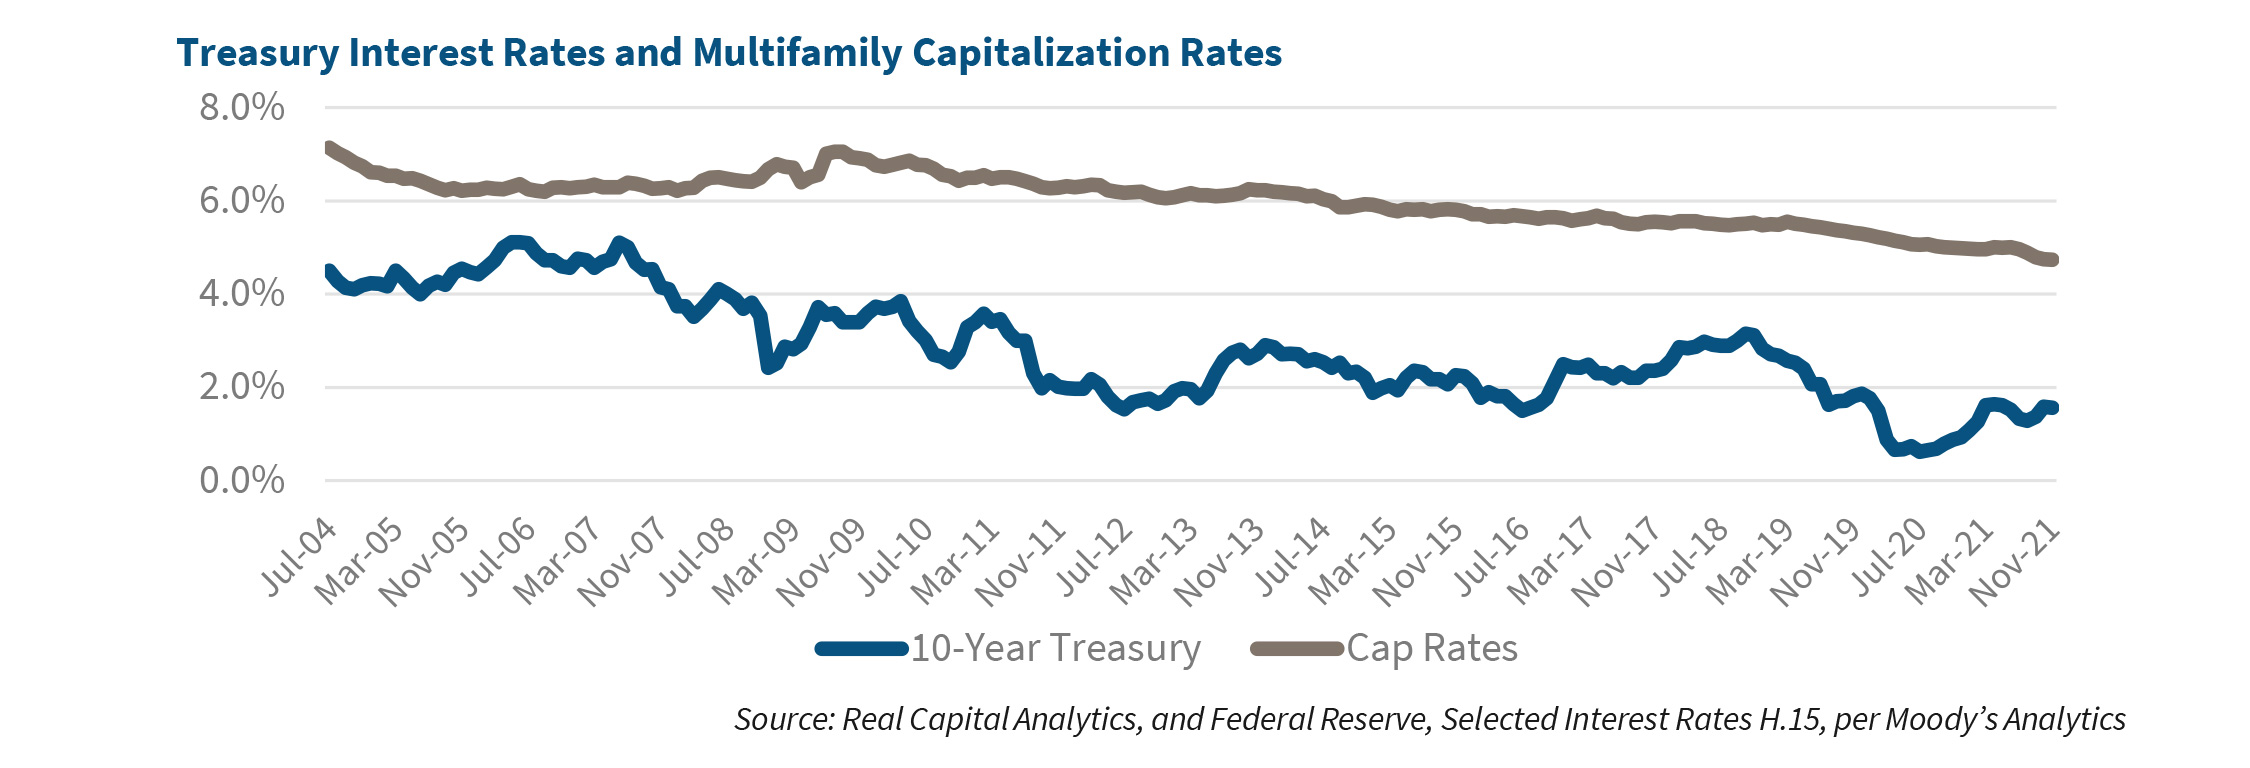 Treasury Interest Rates and Multifamily Capitalization Rates